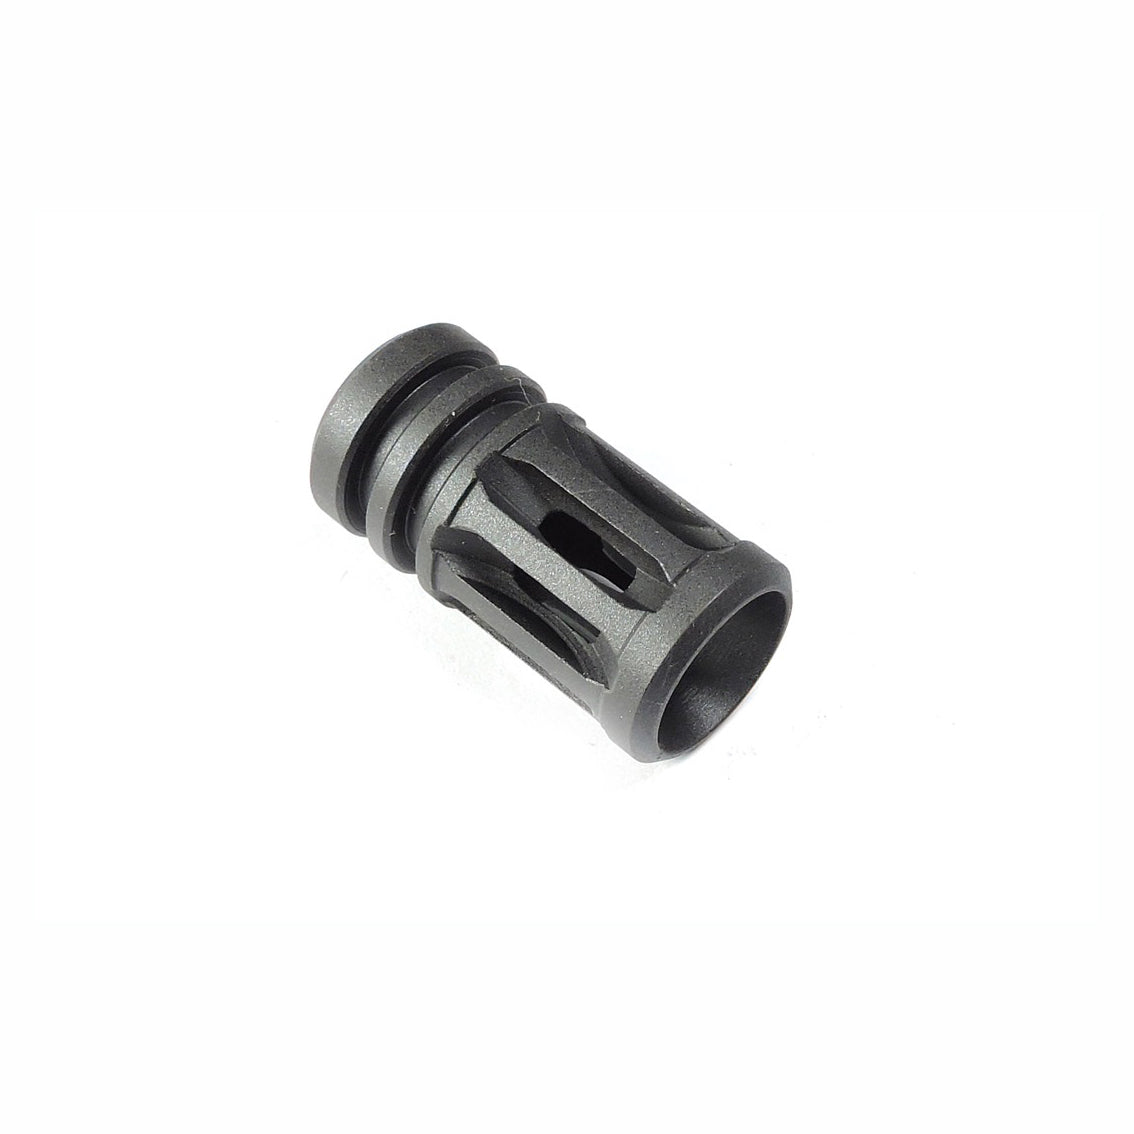 APS M16 Bird Cage Style Flash Hider for 14mm- ( BB007A )